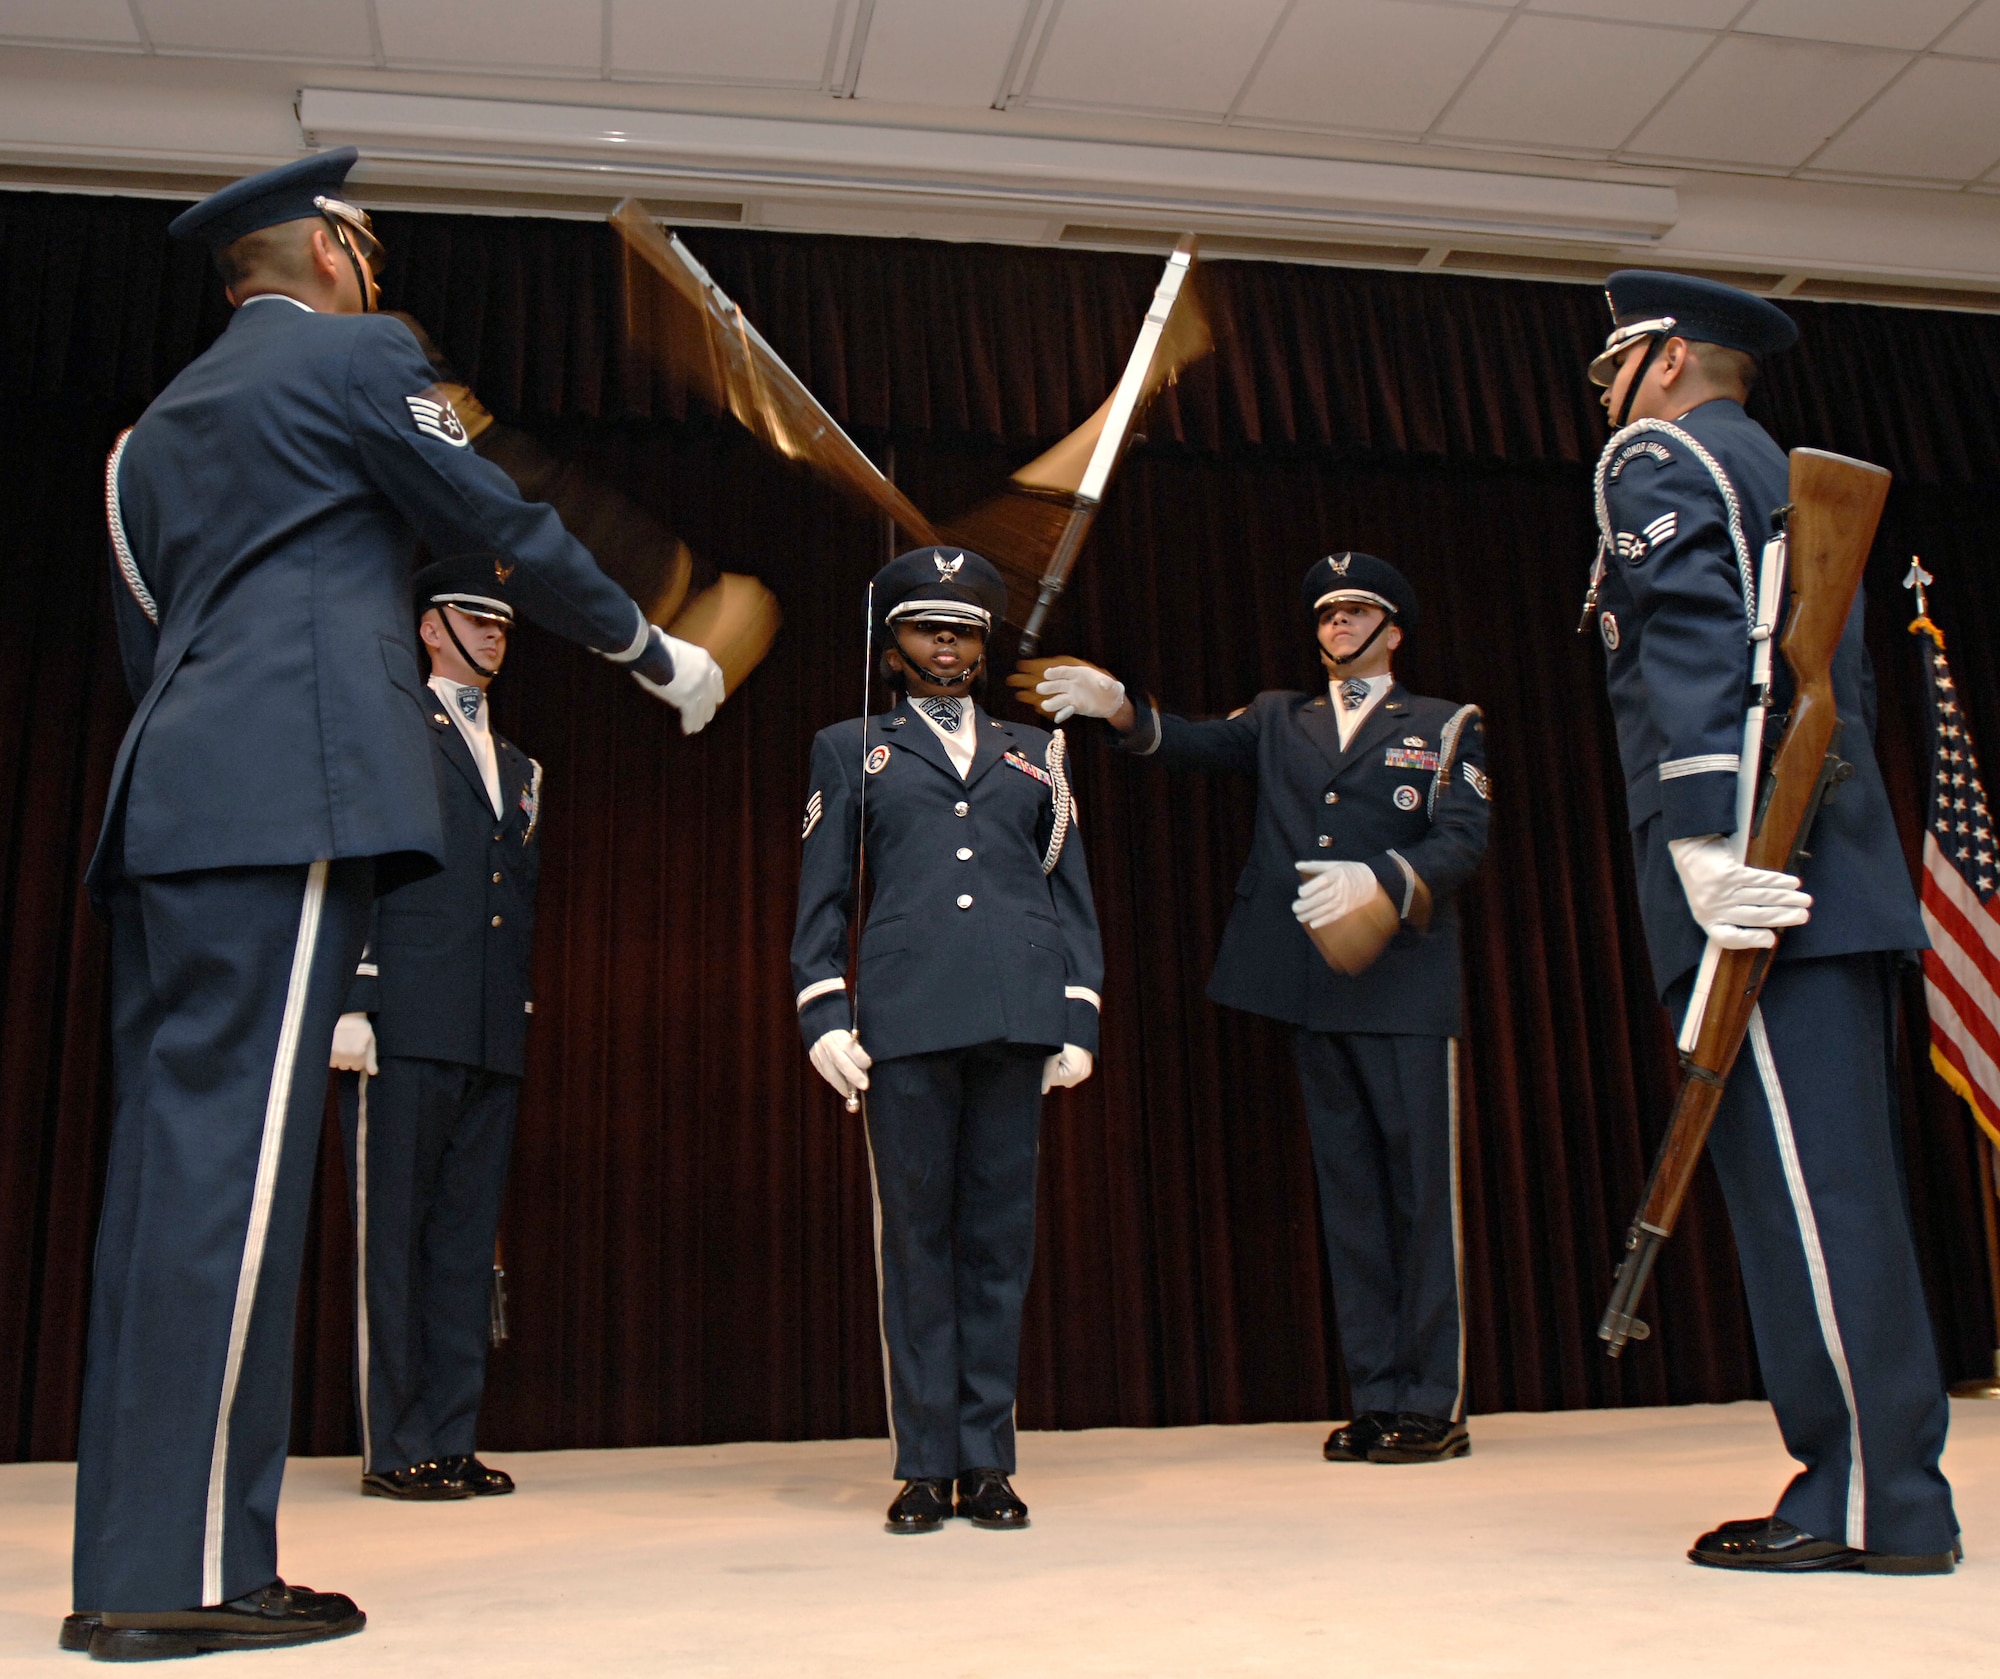 Incirlik Air Base drill team members toss rifles that narrowly miss their drill master as part of a special presentation during the 39th Air Base Wing annual awards banquet, Jan. 30. The annual awards banquet is held to honor the members of the wing that stood-out above their peers during the 2008 calendar year. (U.S. Air Force photo/Senior Airman Benjamin Wilson)